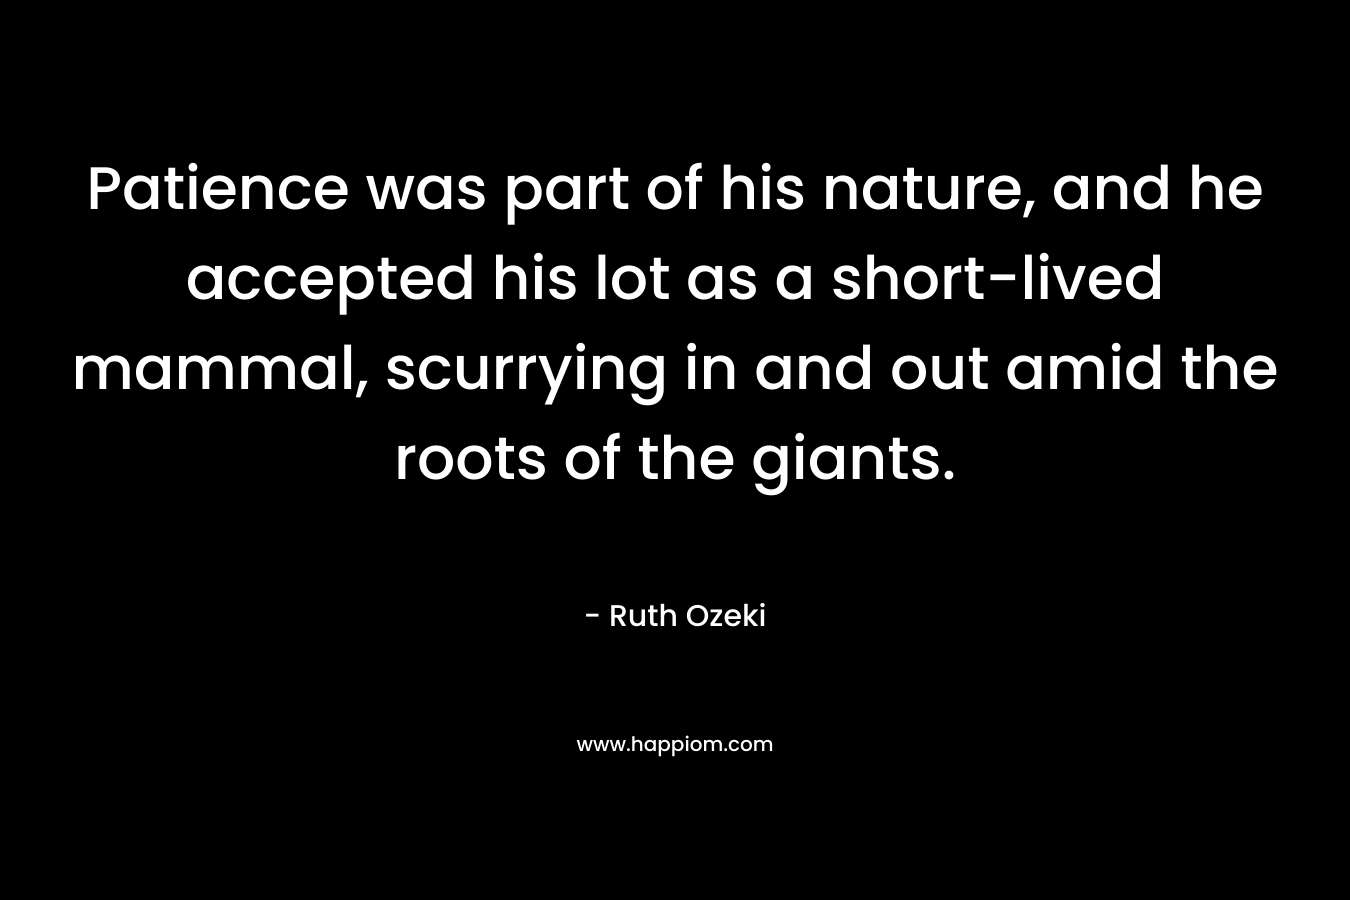 Patience was part of his nature, and he accepted his lot as a short-lived mammal, scurrying in and out amid the roots of the giants. – Ruth Ozeki